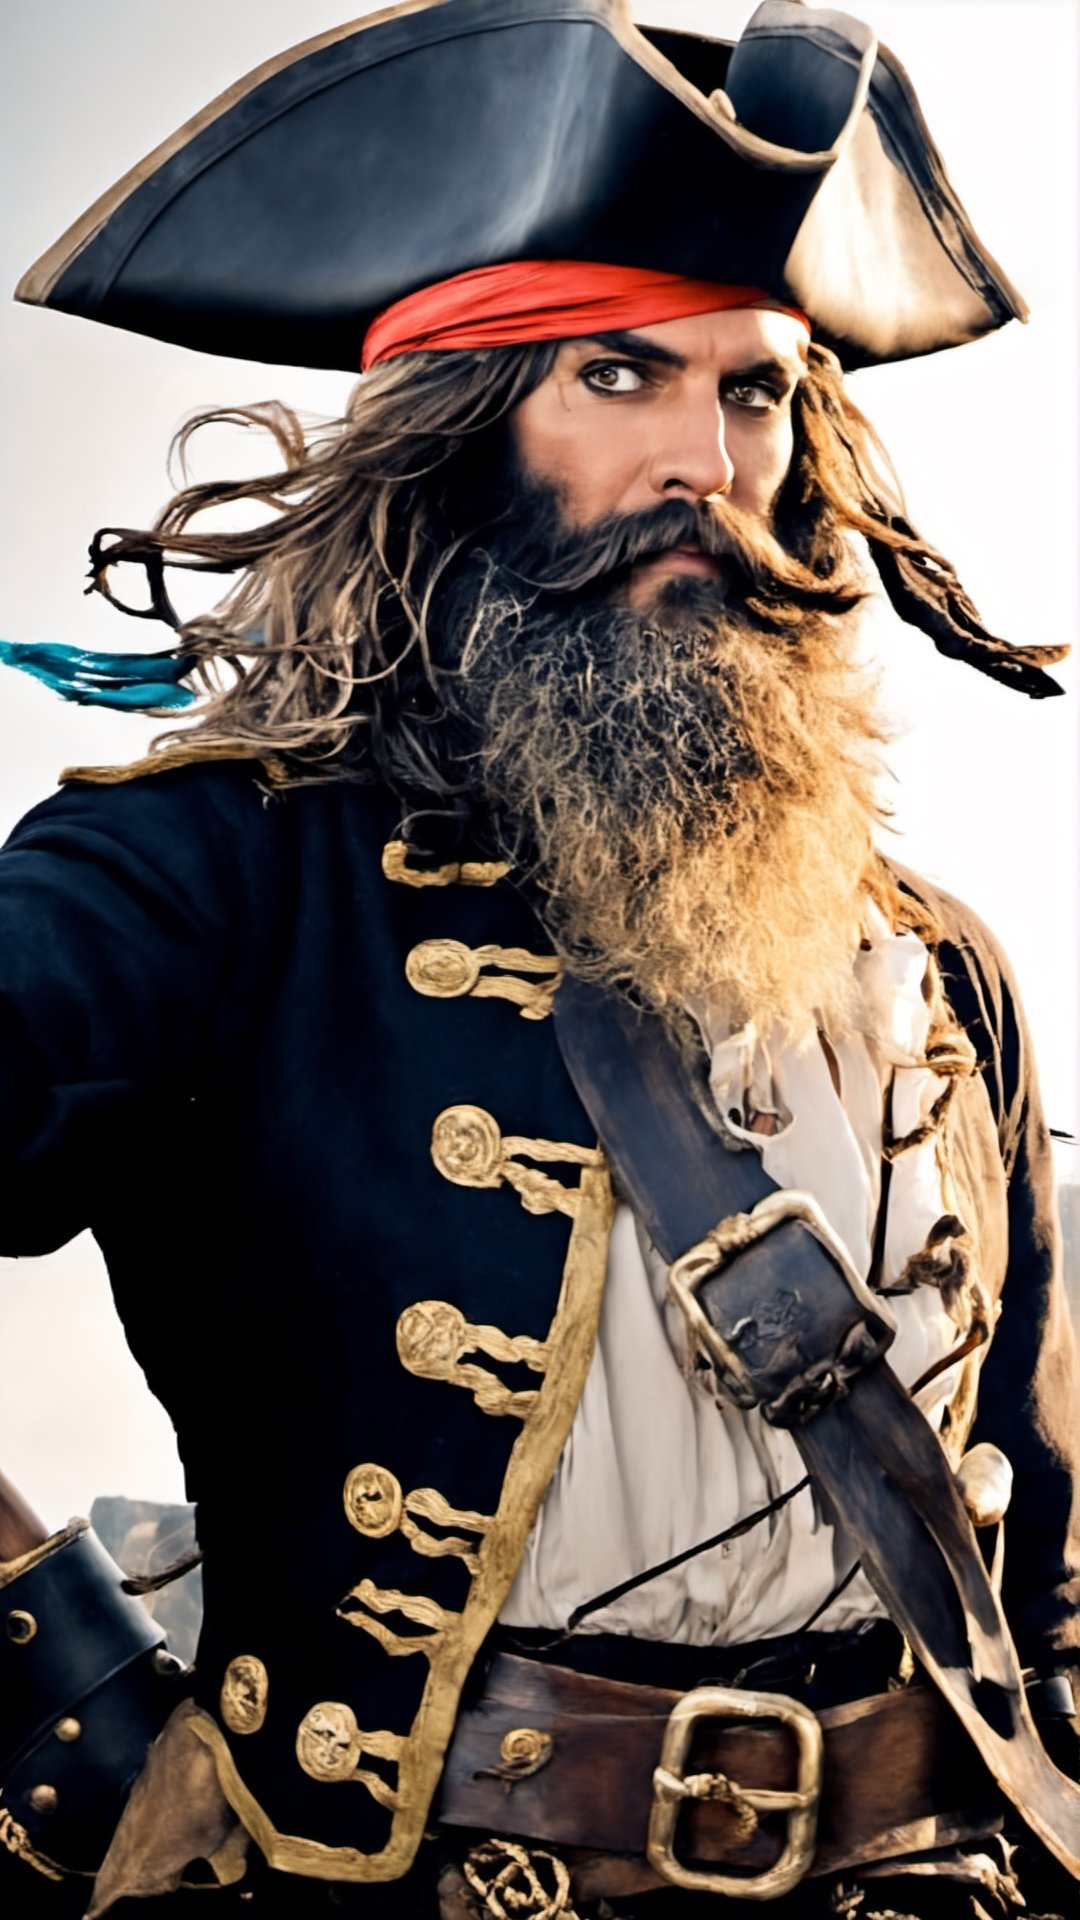 Imagine a pirate who is the captain of a pirate ship, dirty with a long beard, wild